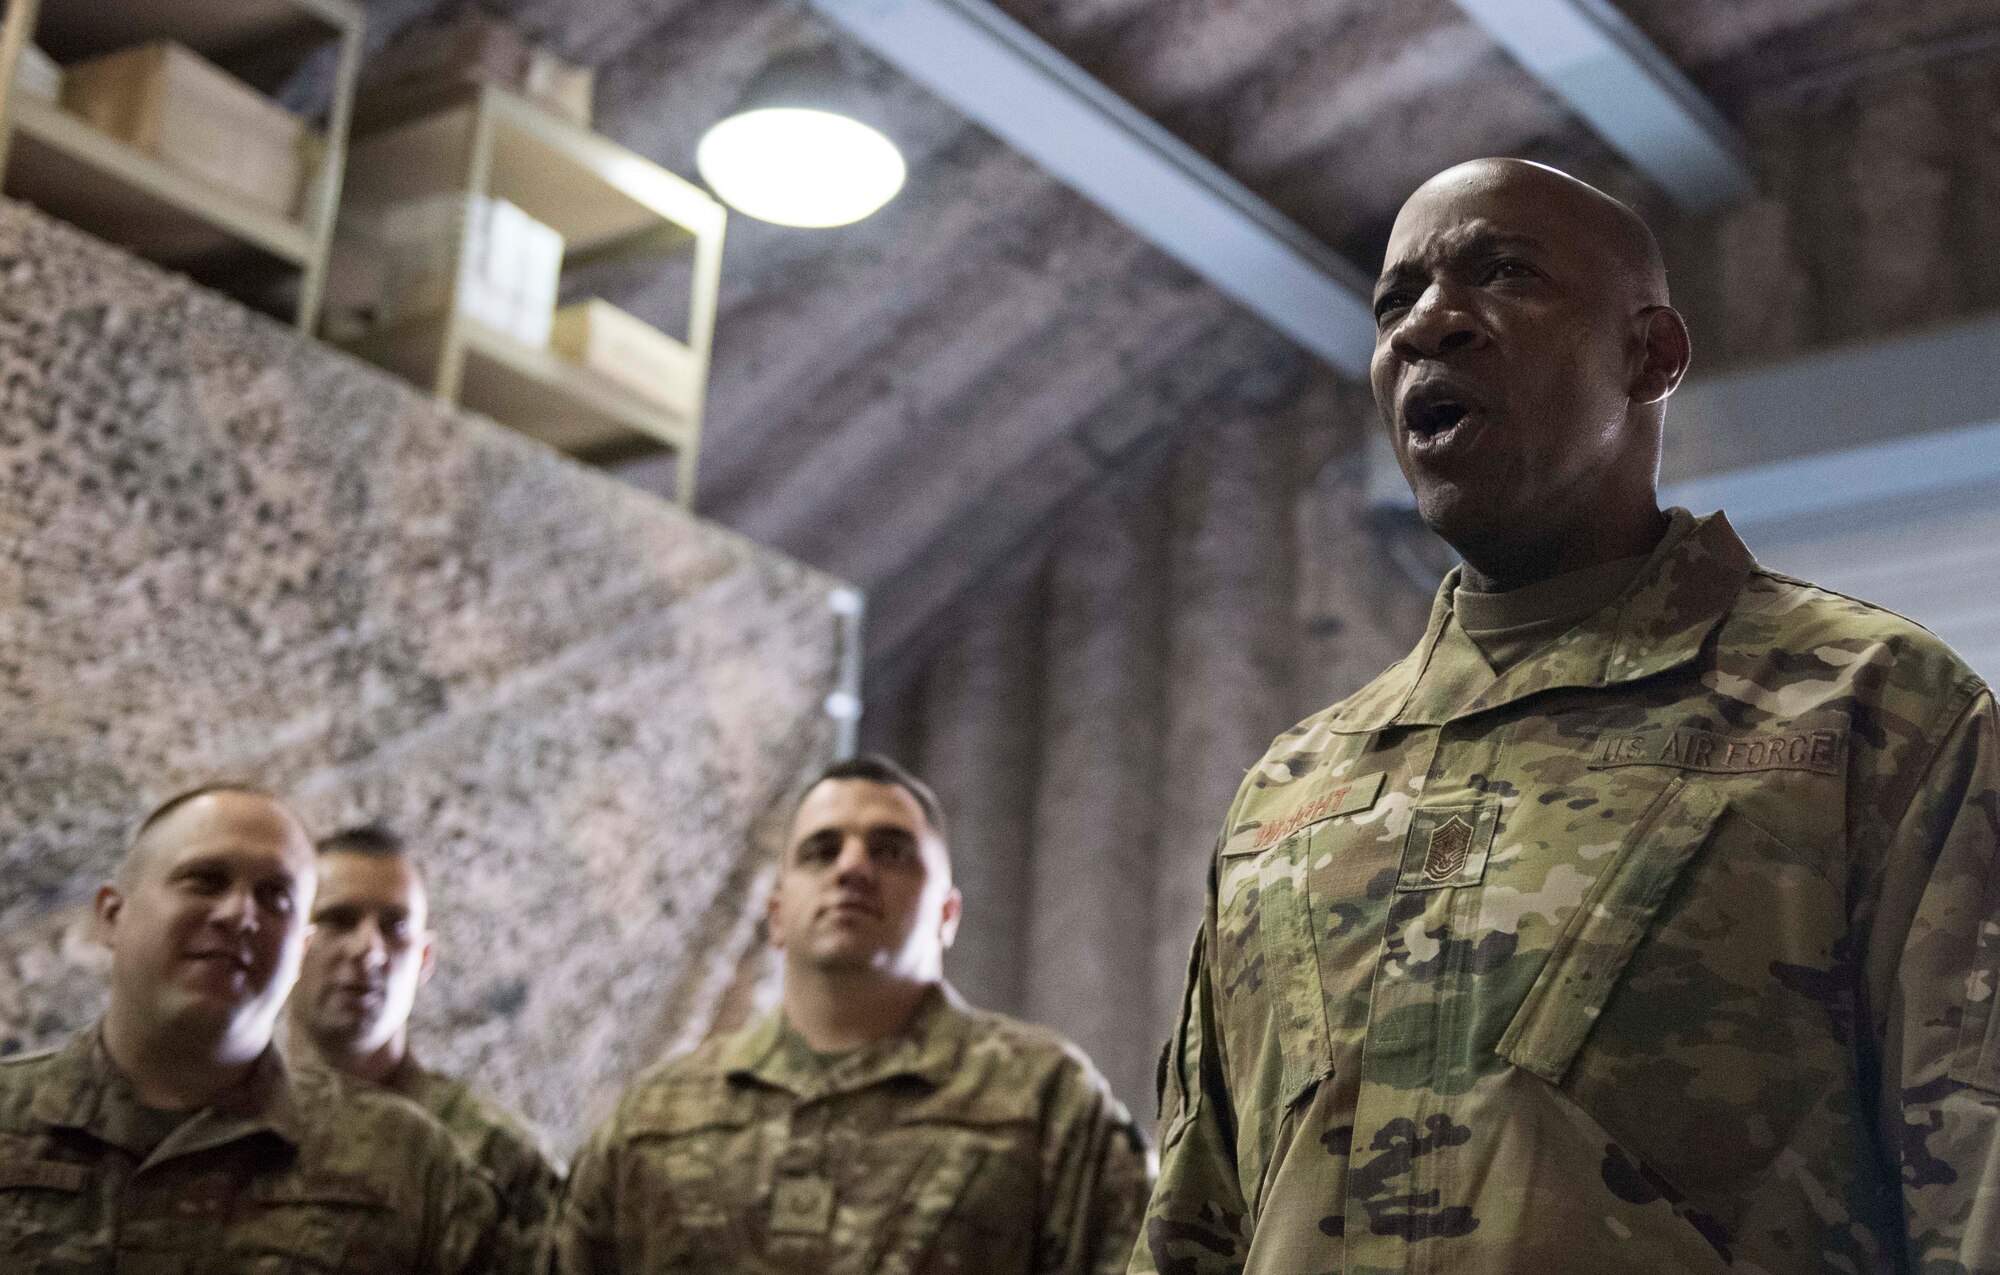 Chief Master Sgt. of the Air Force Kaleth O. Wright leads Airmen in the 455th Expeditionary Communications Squadron chant during a visit to Bagram Airfield, Afghanistan, Dec. 25, 2018. Wright responded to a variety of questions to include changes to the enlisted assignments system. (U.S. Air Force photo by Senior Airman Kaylee Dubois)